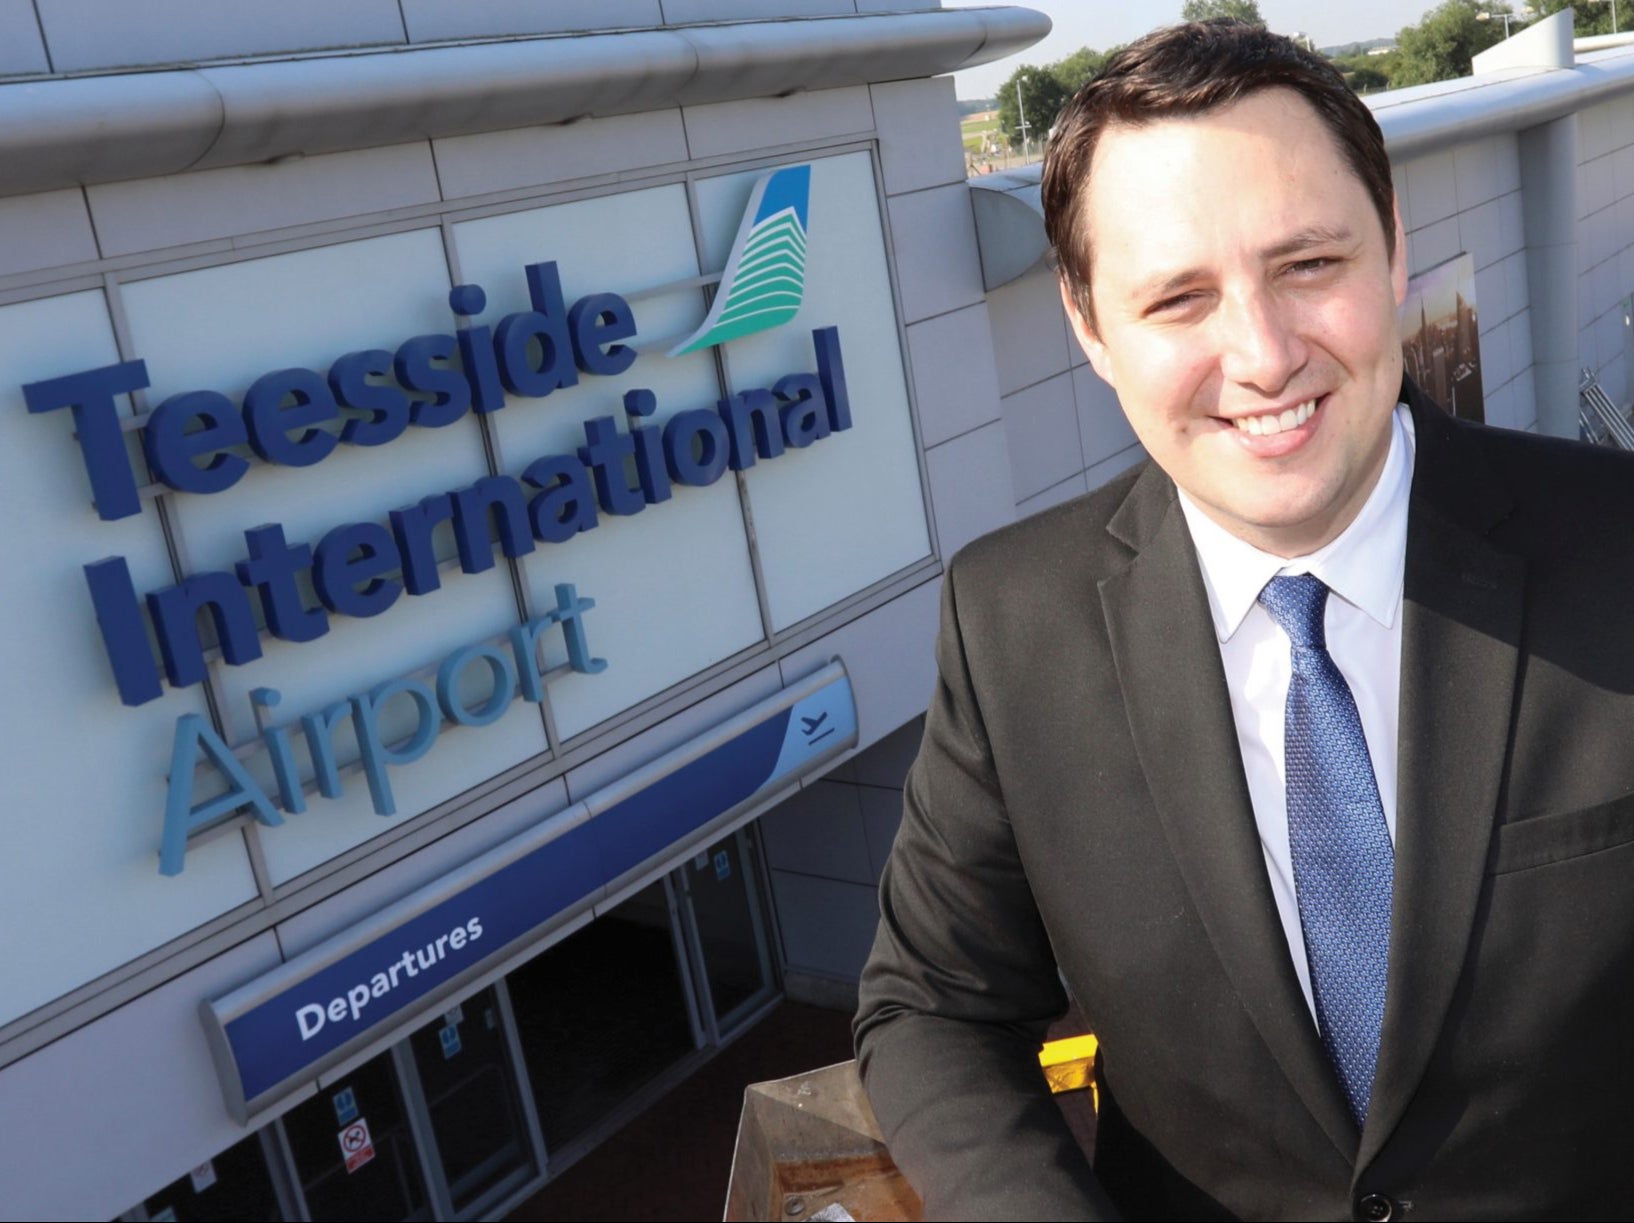 Loss leader: Ben Houchen, Tees Valley mayor, outside Teesside airport – which lost £13.8m in 2020-21